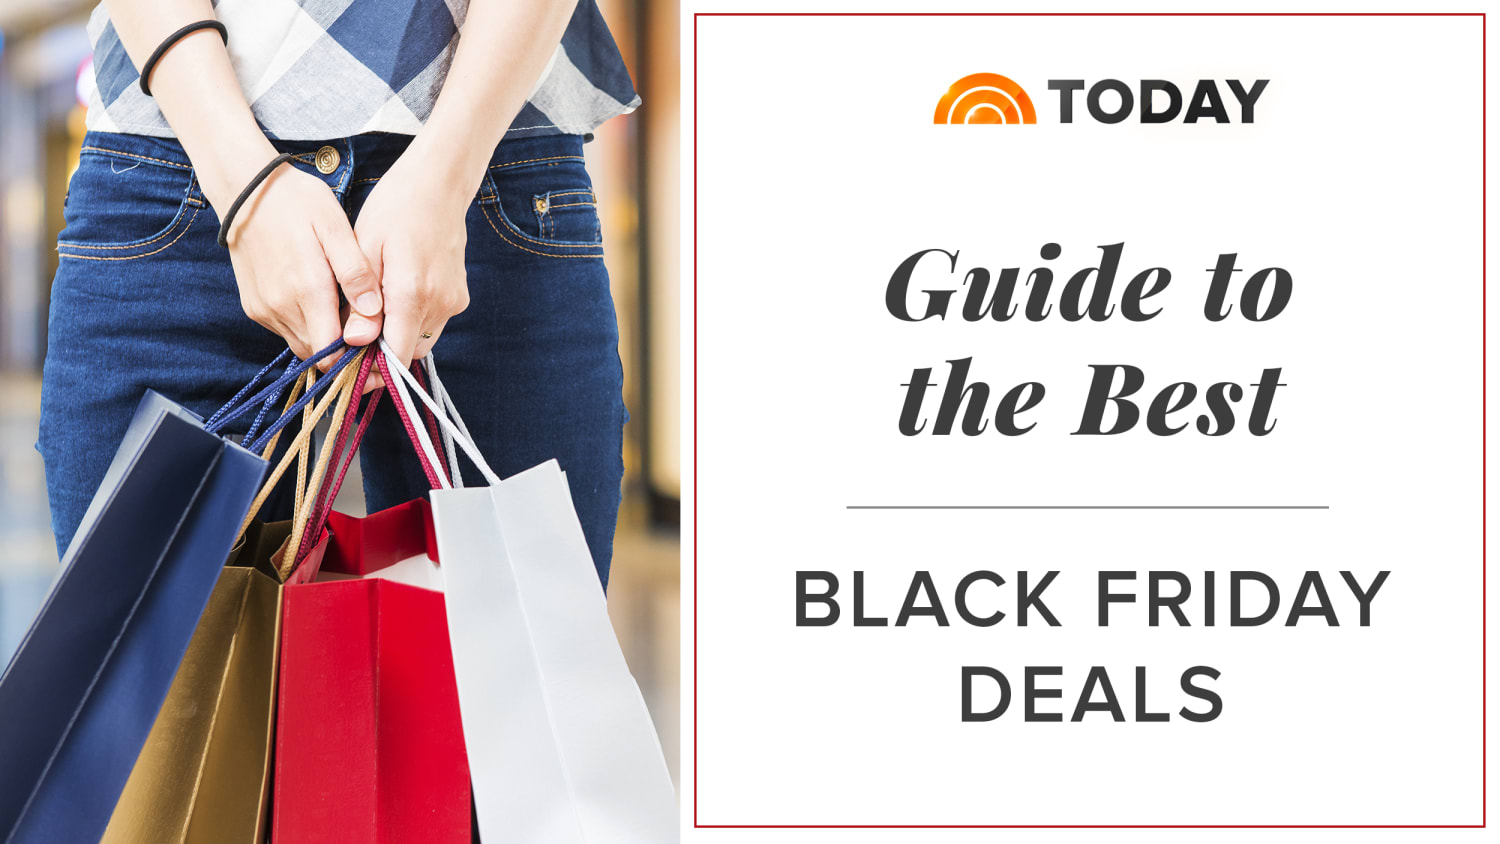 Best Black Friday Deals on Amazon, Target and more 2017 - TODAY.com - Will Uh E Have Black Friday Deals